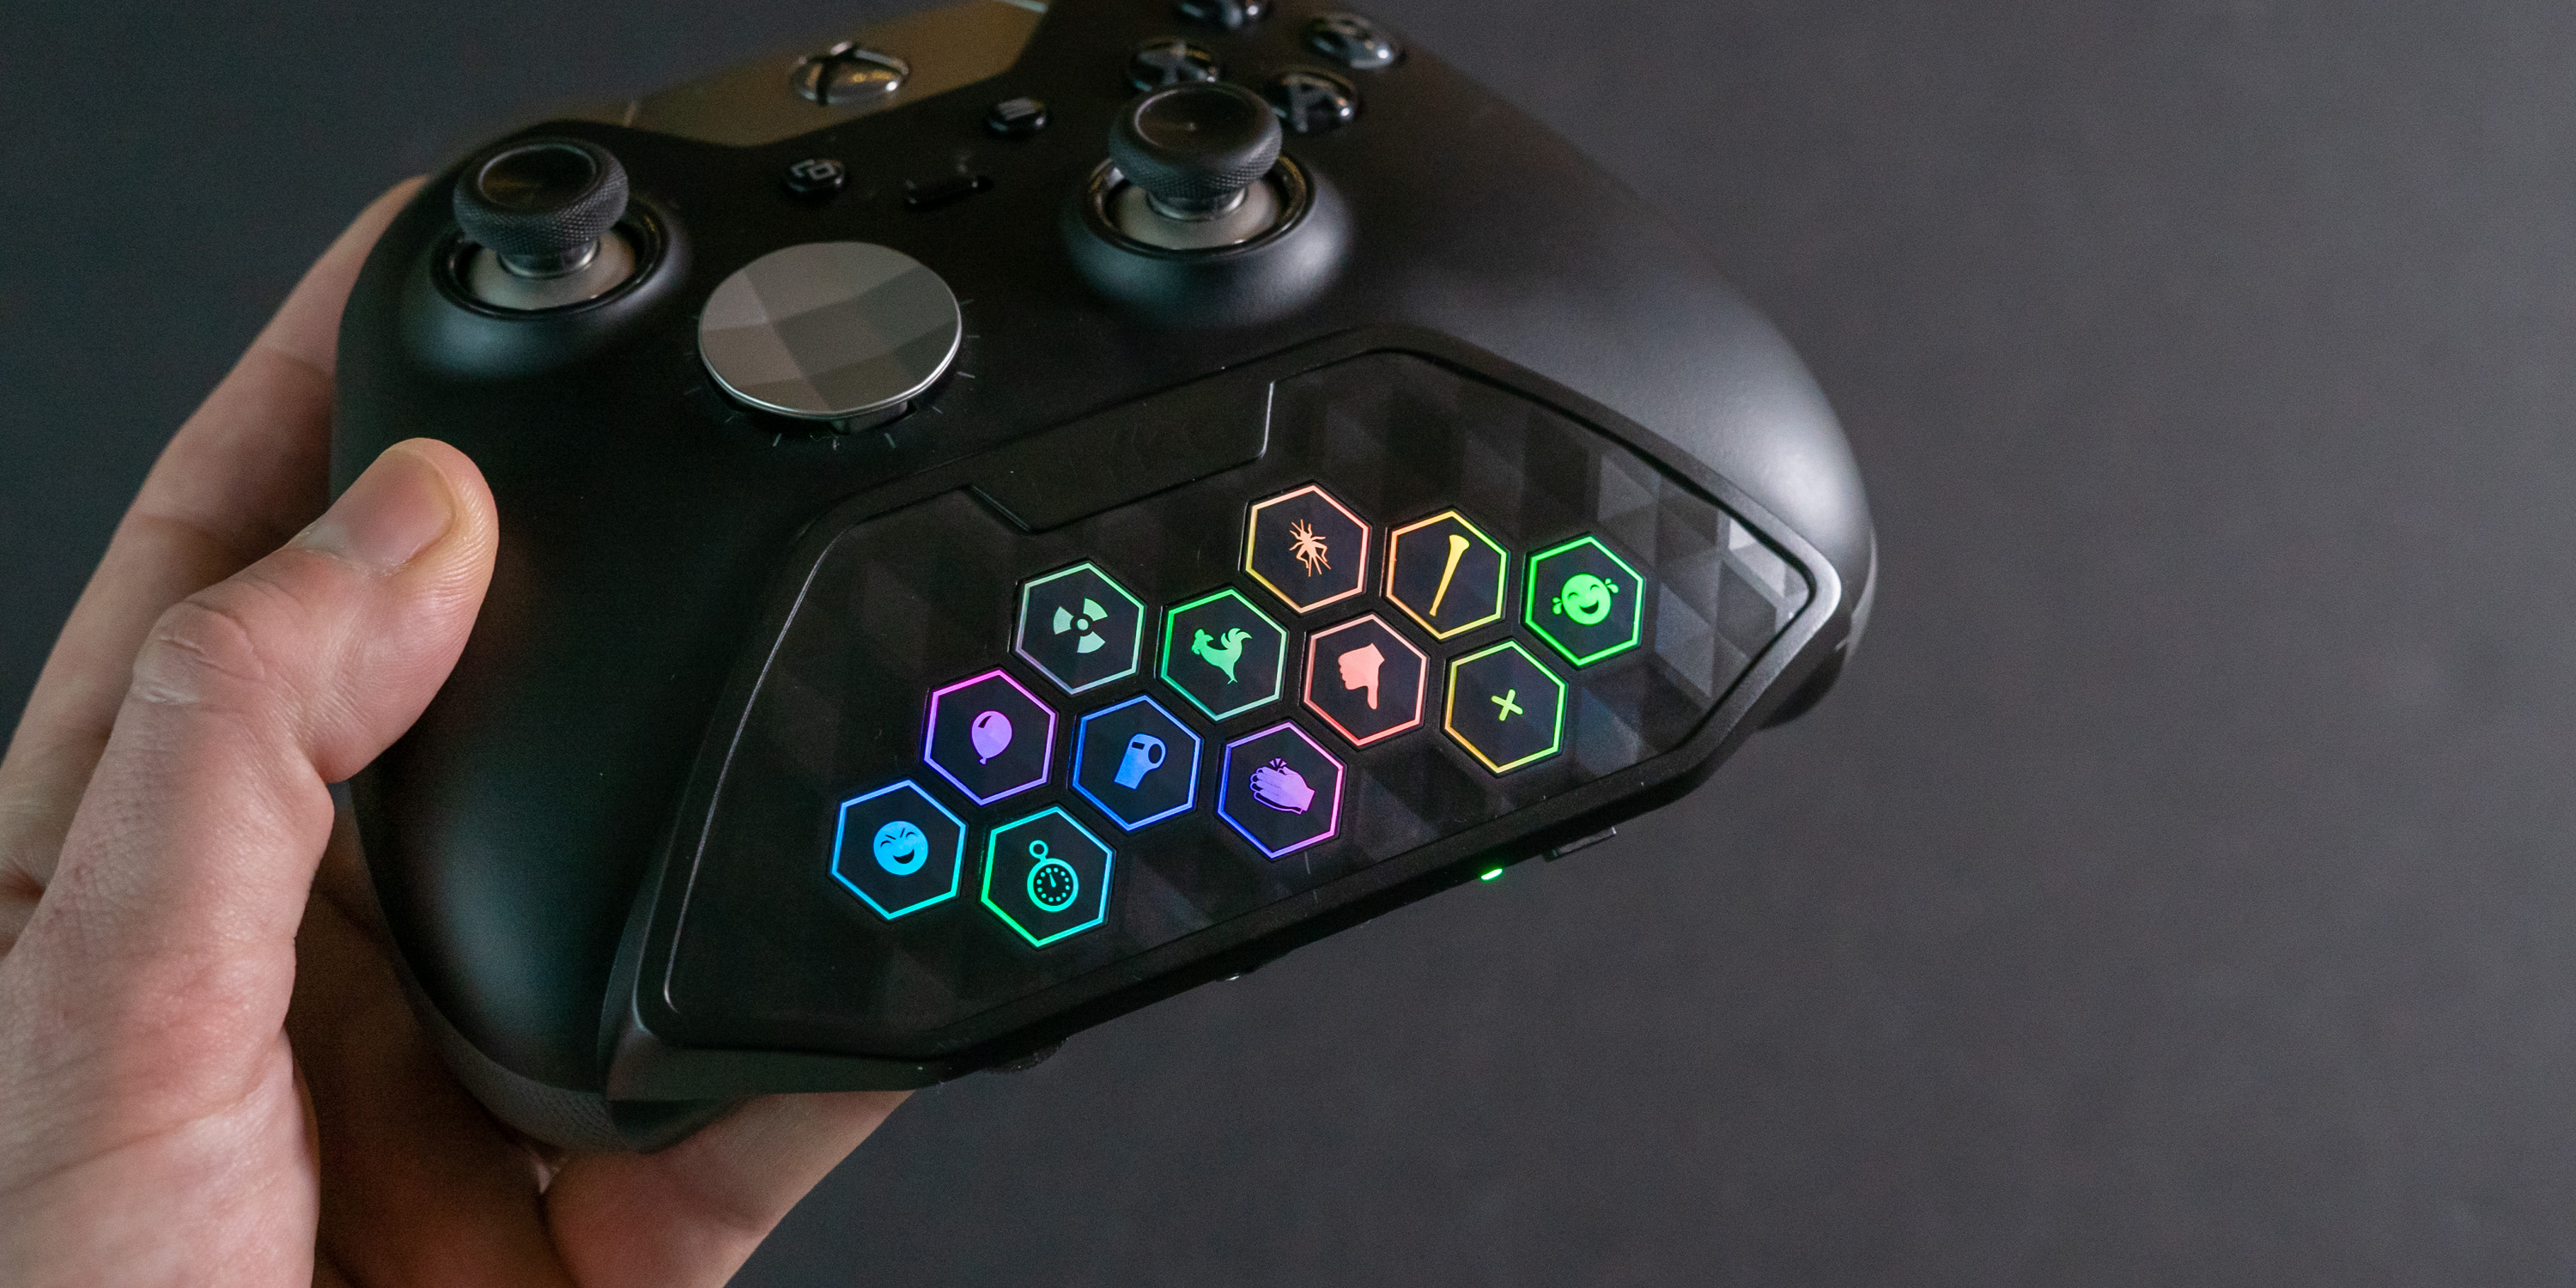 Nyko Sound Pad Review: Add a sound board your Xbox or PS4